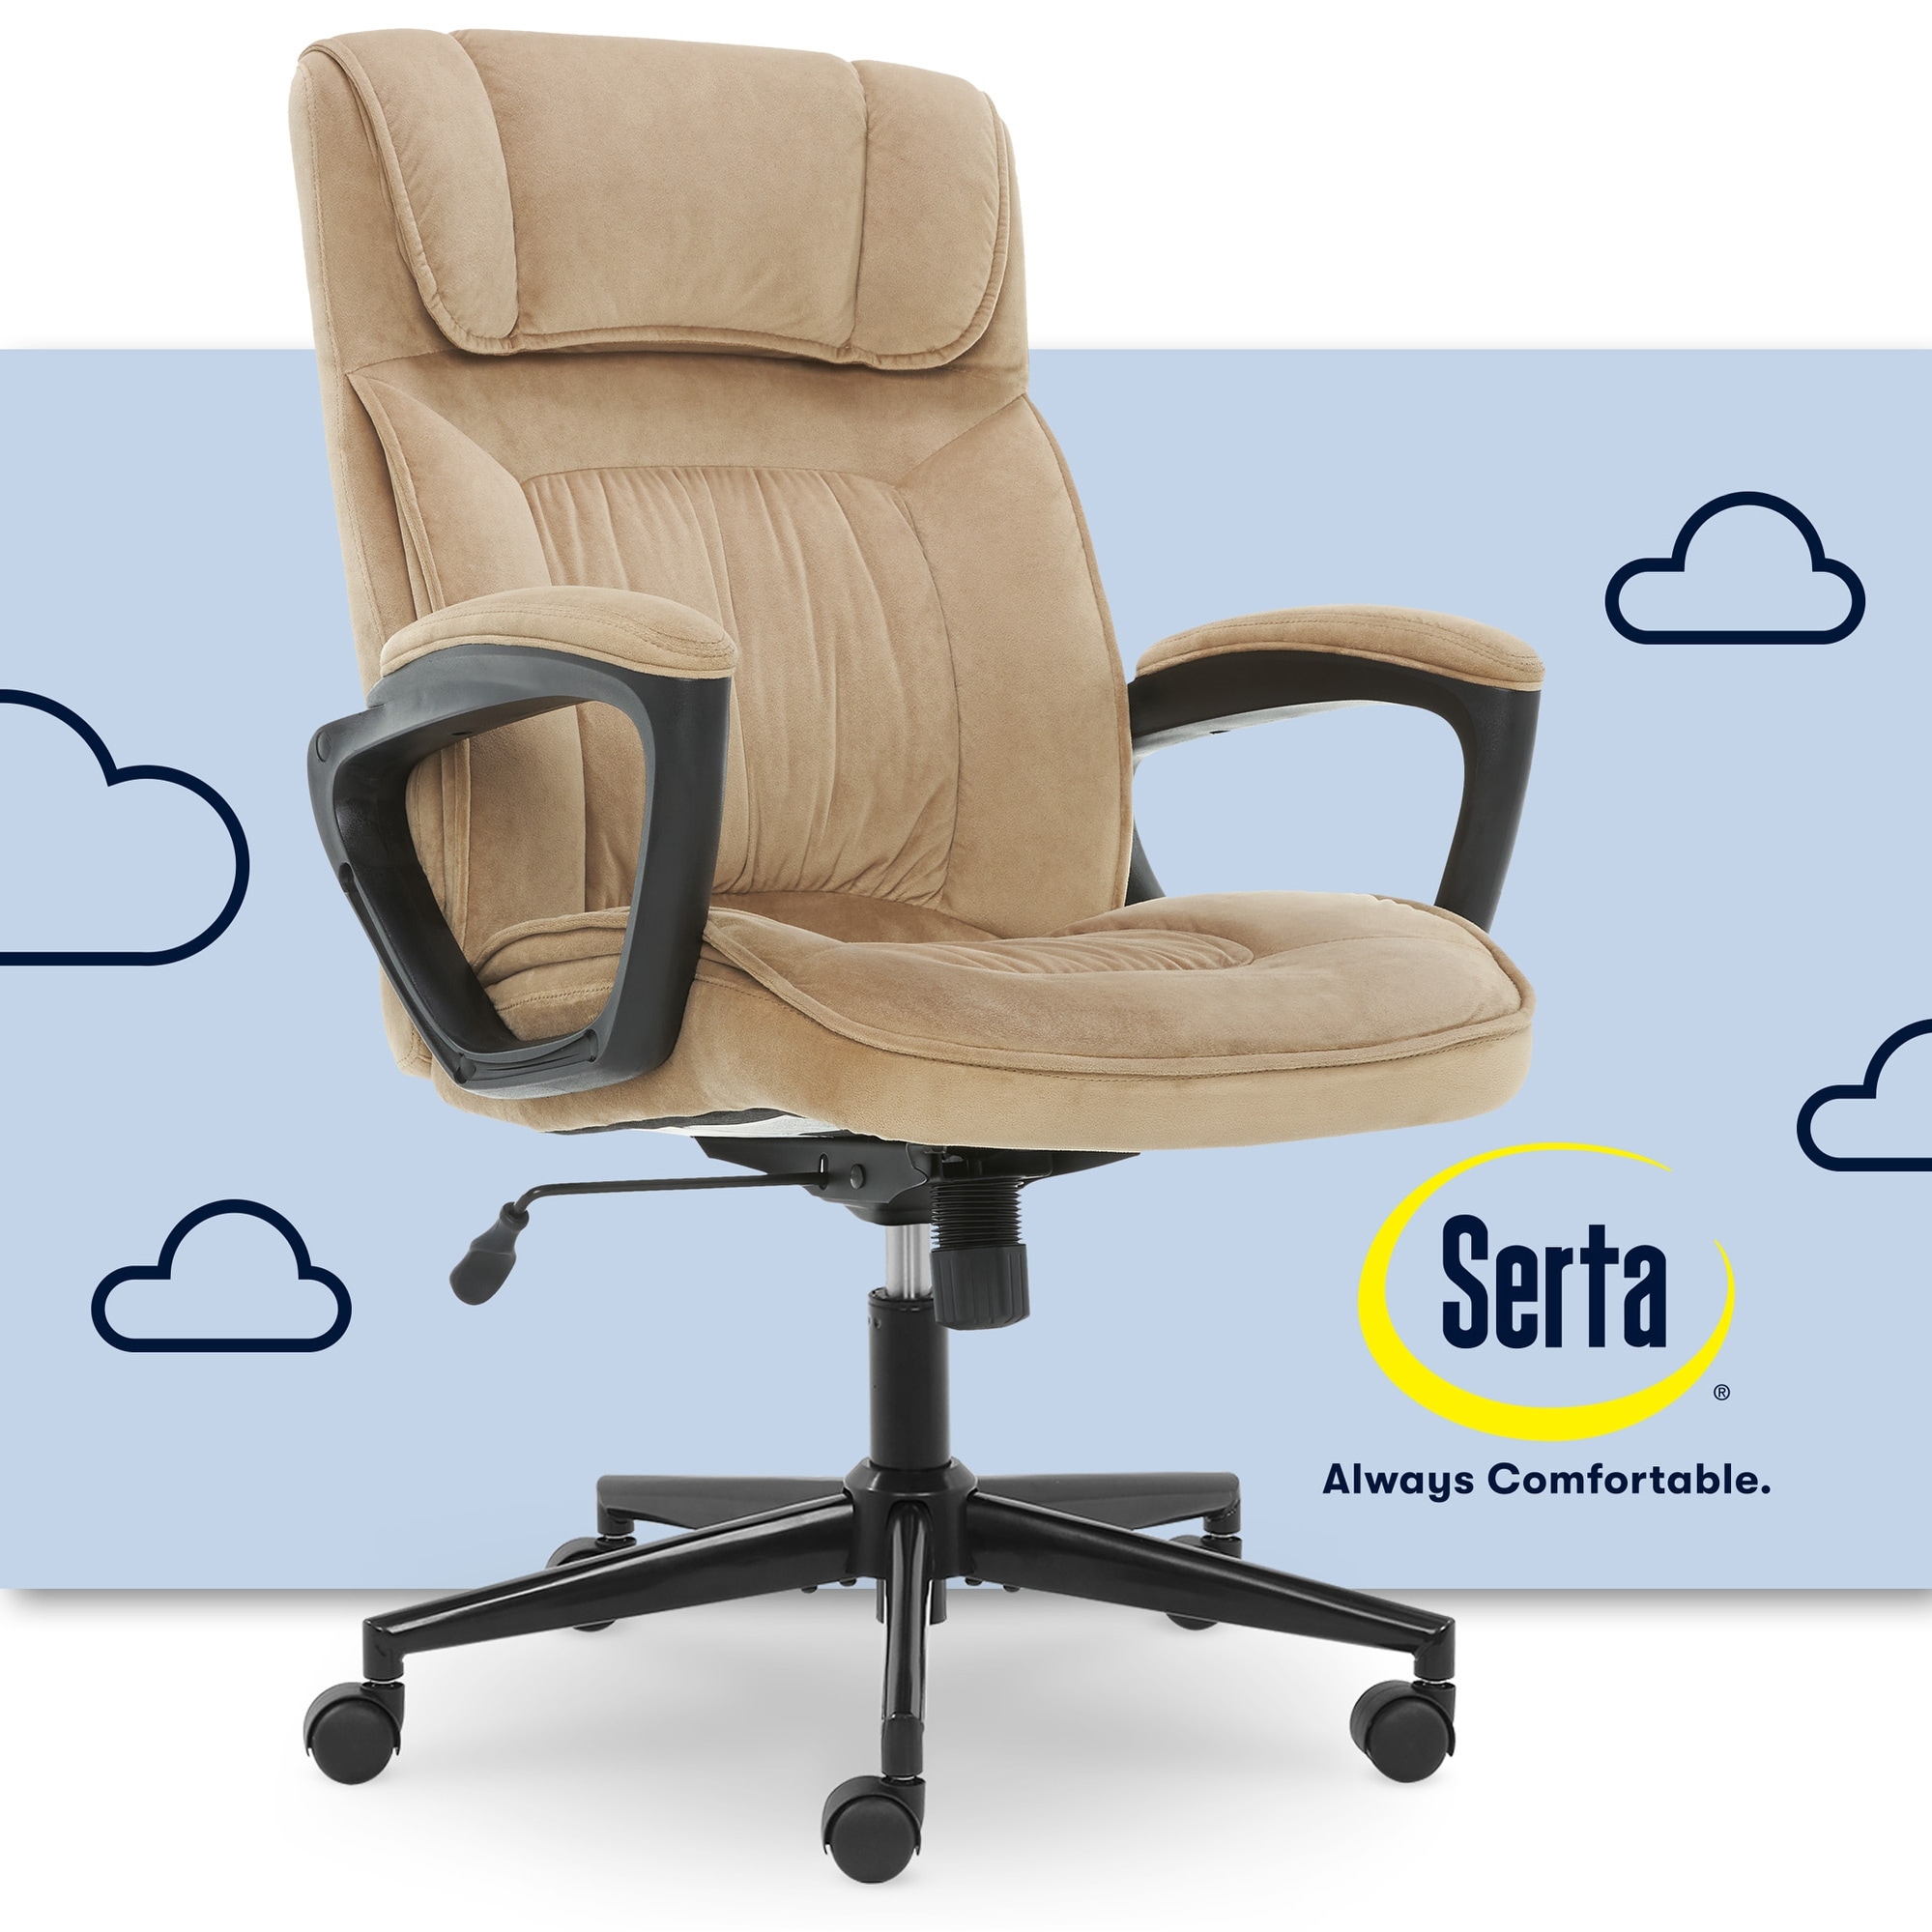 Serta Essentials Faux Leather Low-Back Office Chair with Back Mesh, Cream